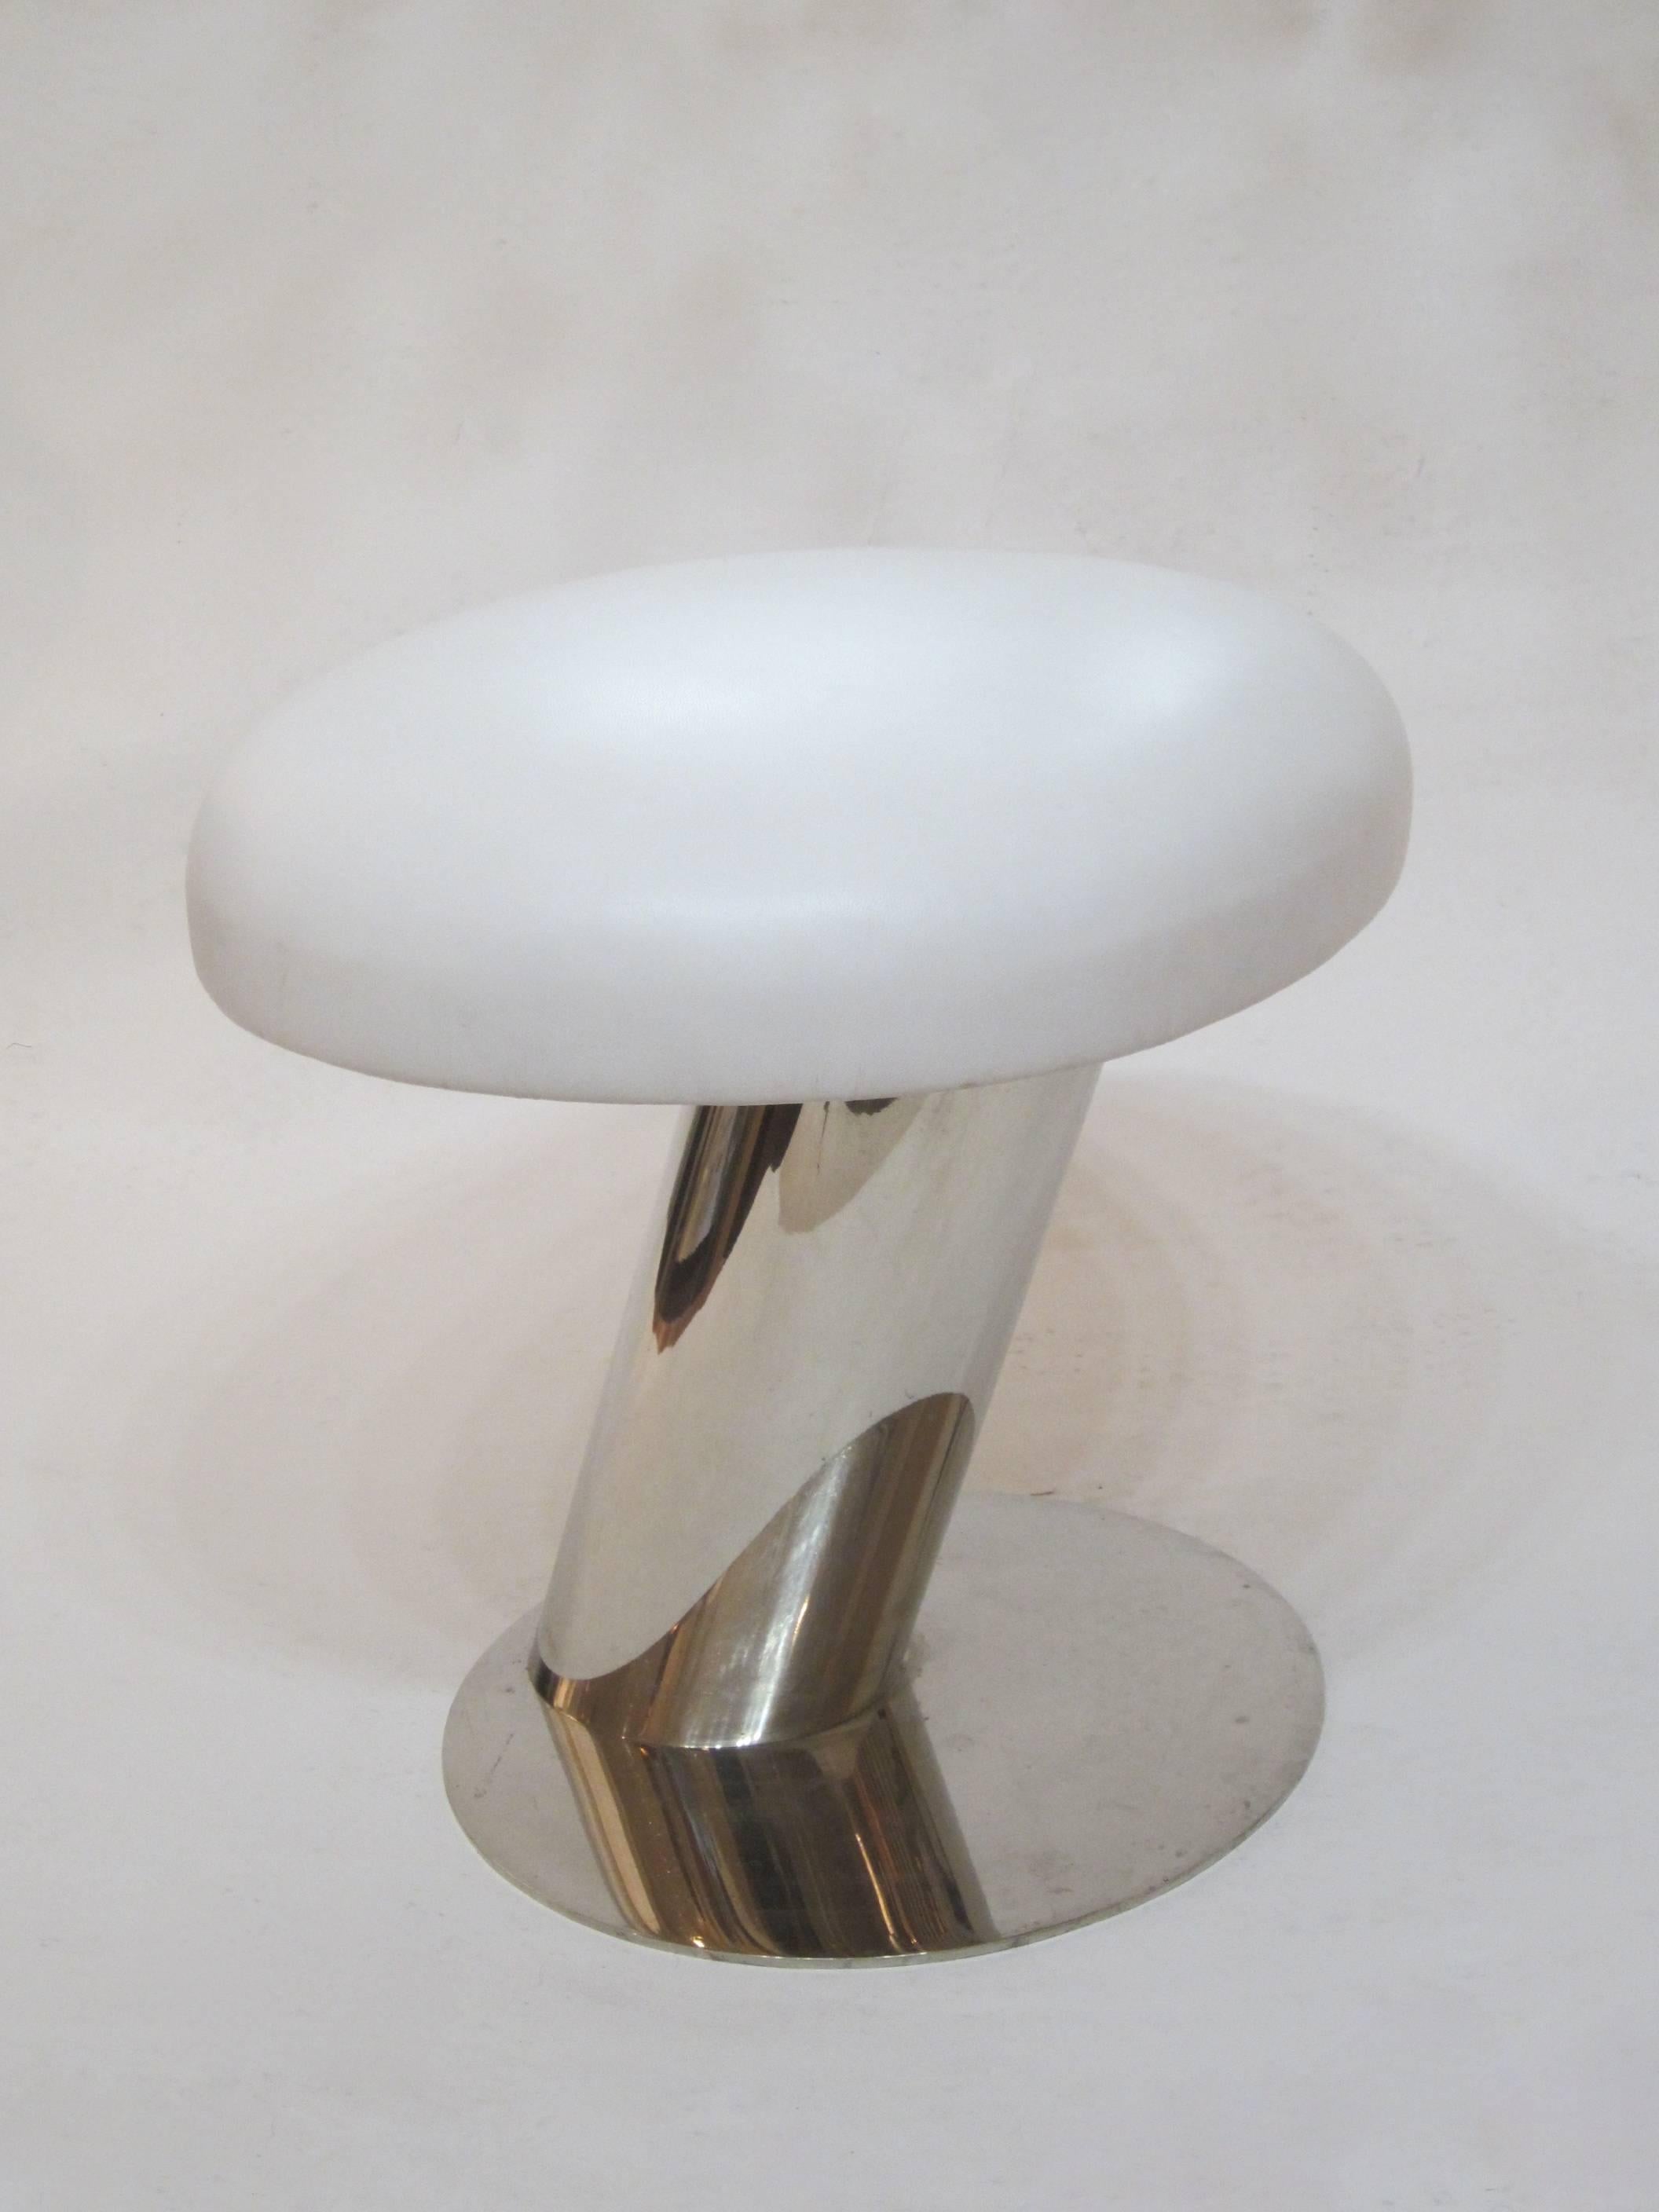 Exquisite stool by Karl Springer with a cantilevered polished steel truck and solid steel disk base. The white marine-leather cushion is oblong and the Springer label is on the frame under the cushion.